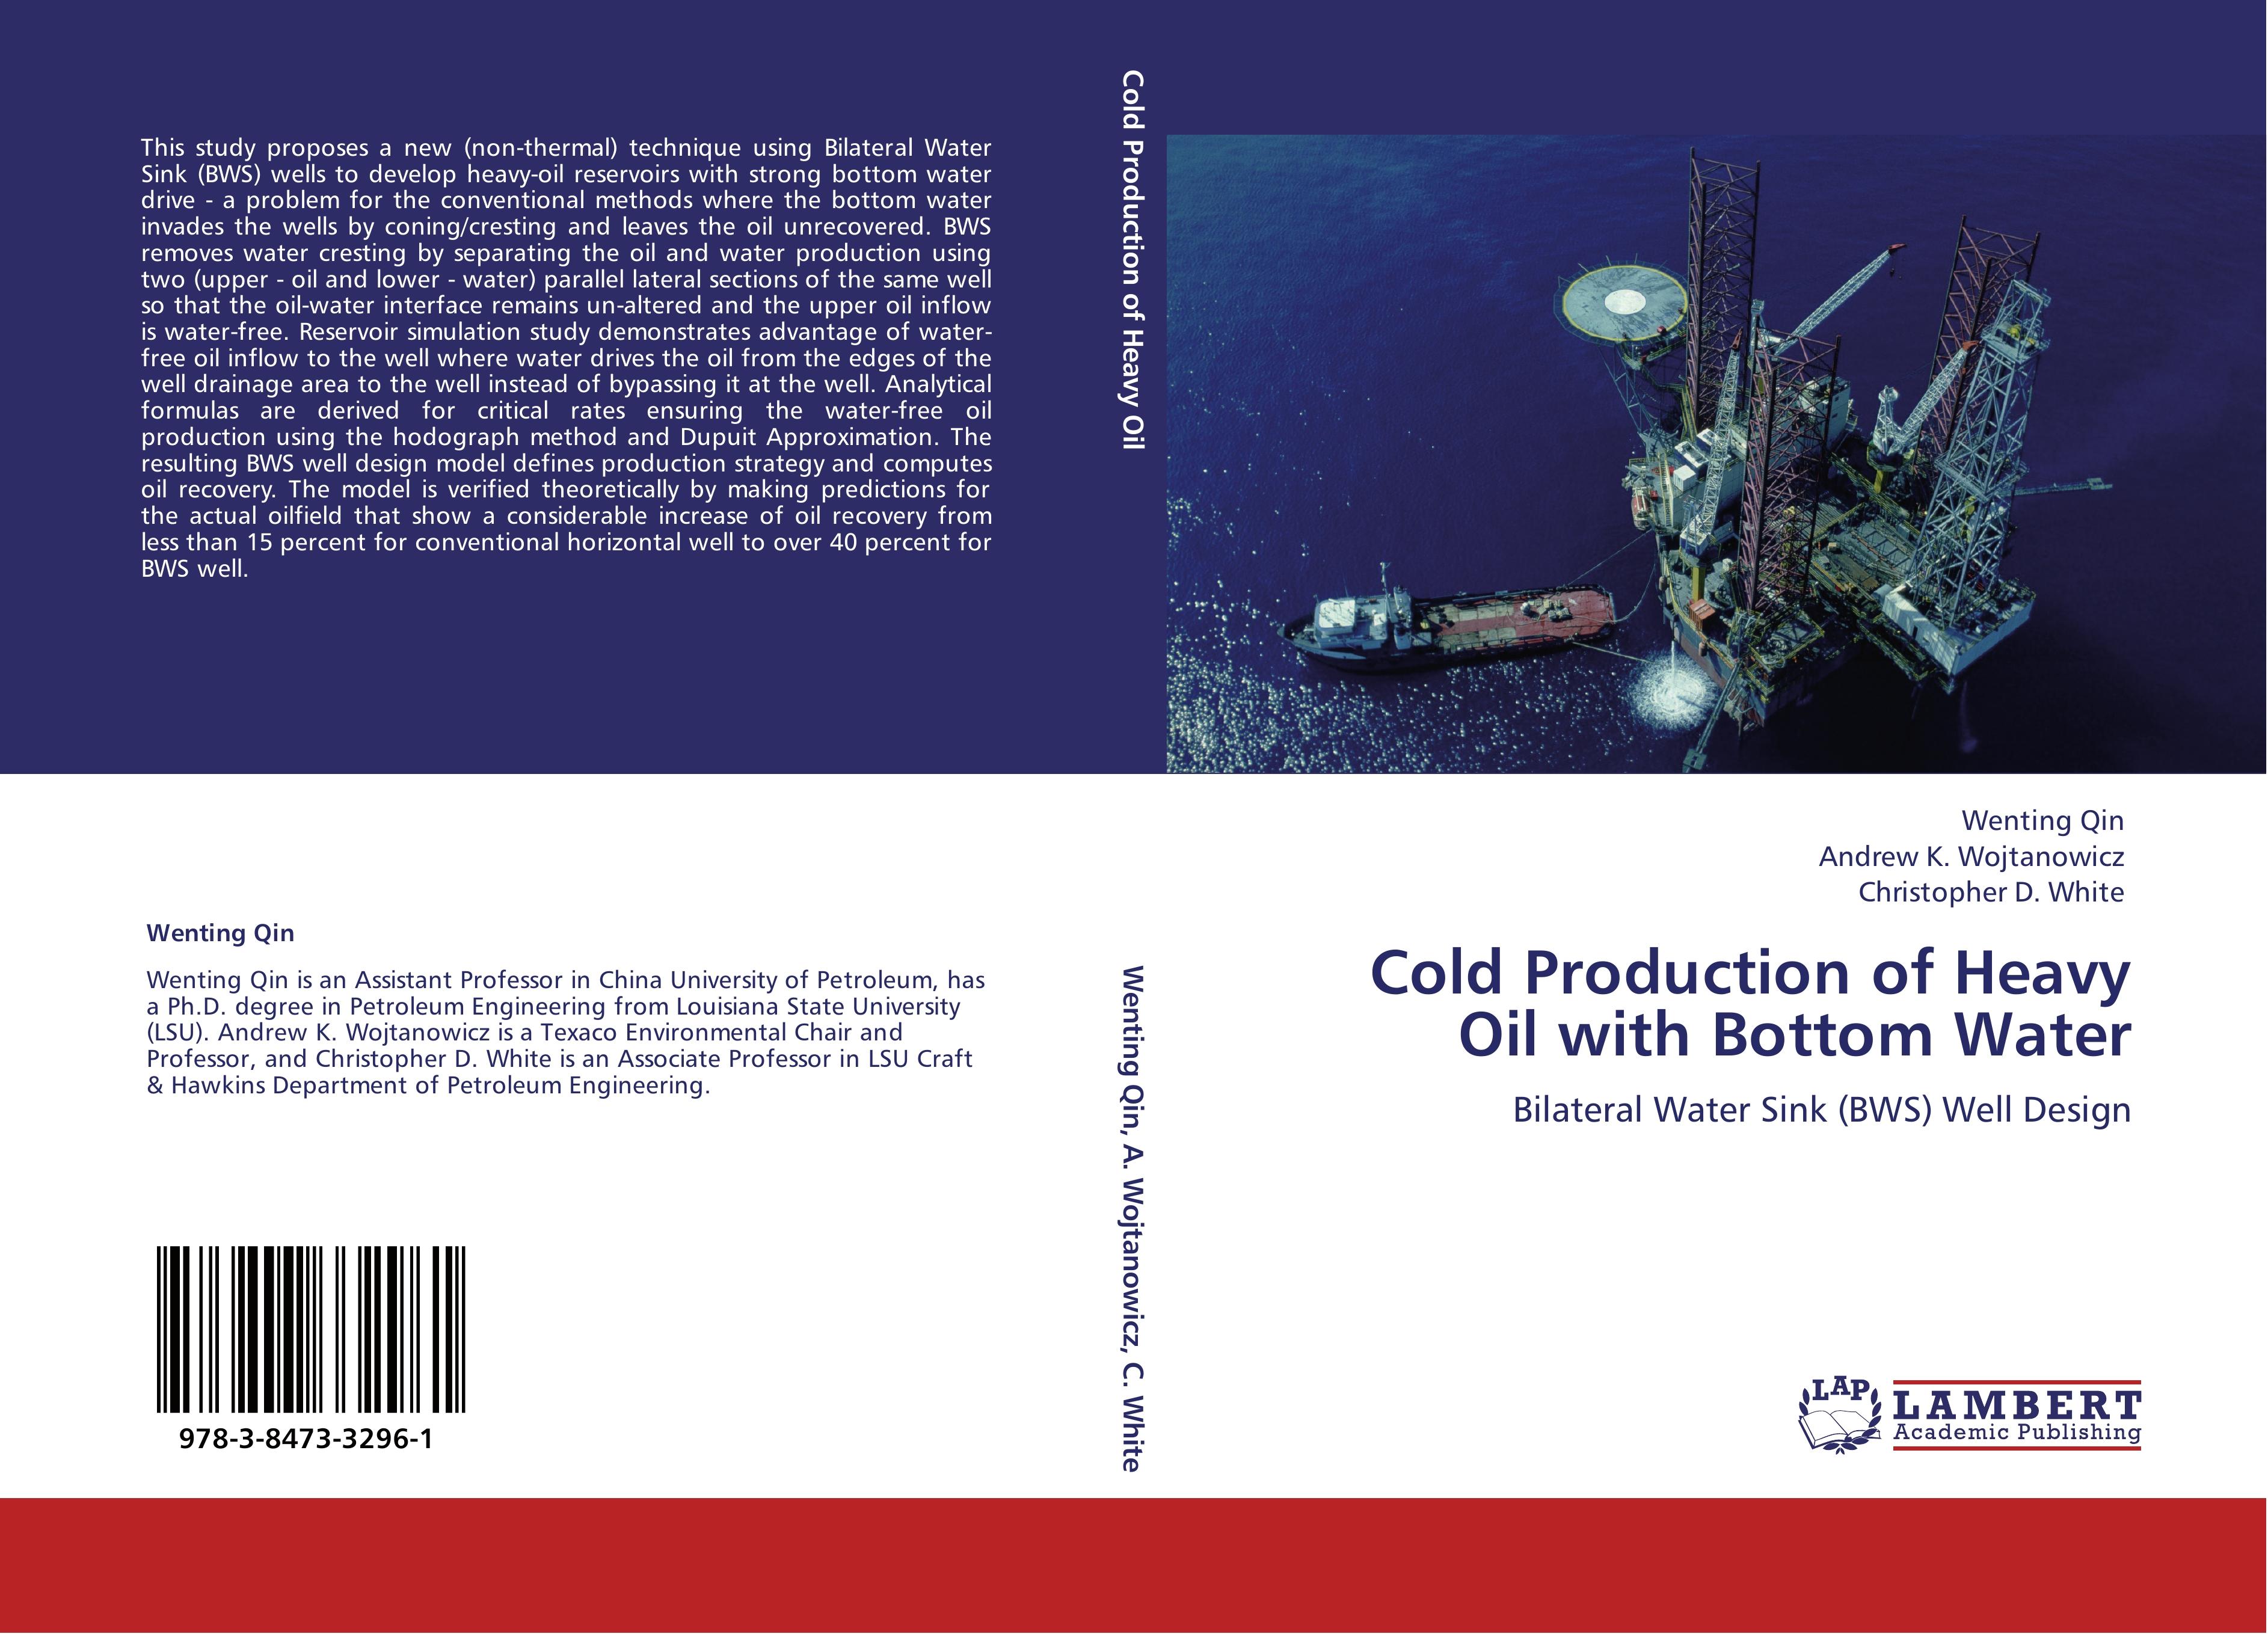 Cold Production of Heavy Oil with Bottom Water - Wenting Qin Andrew K. Wojtanowicz Christopher D. White